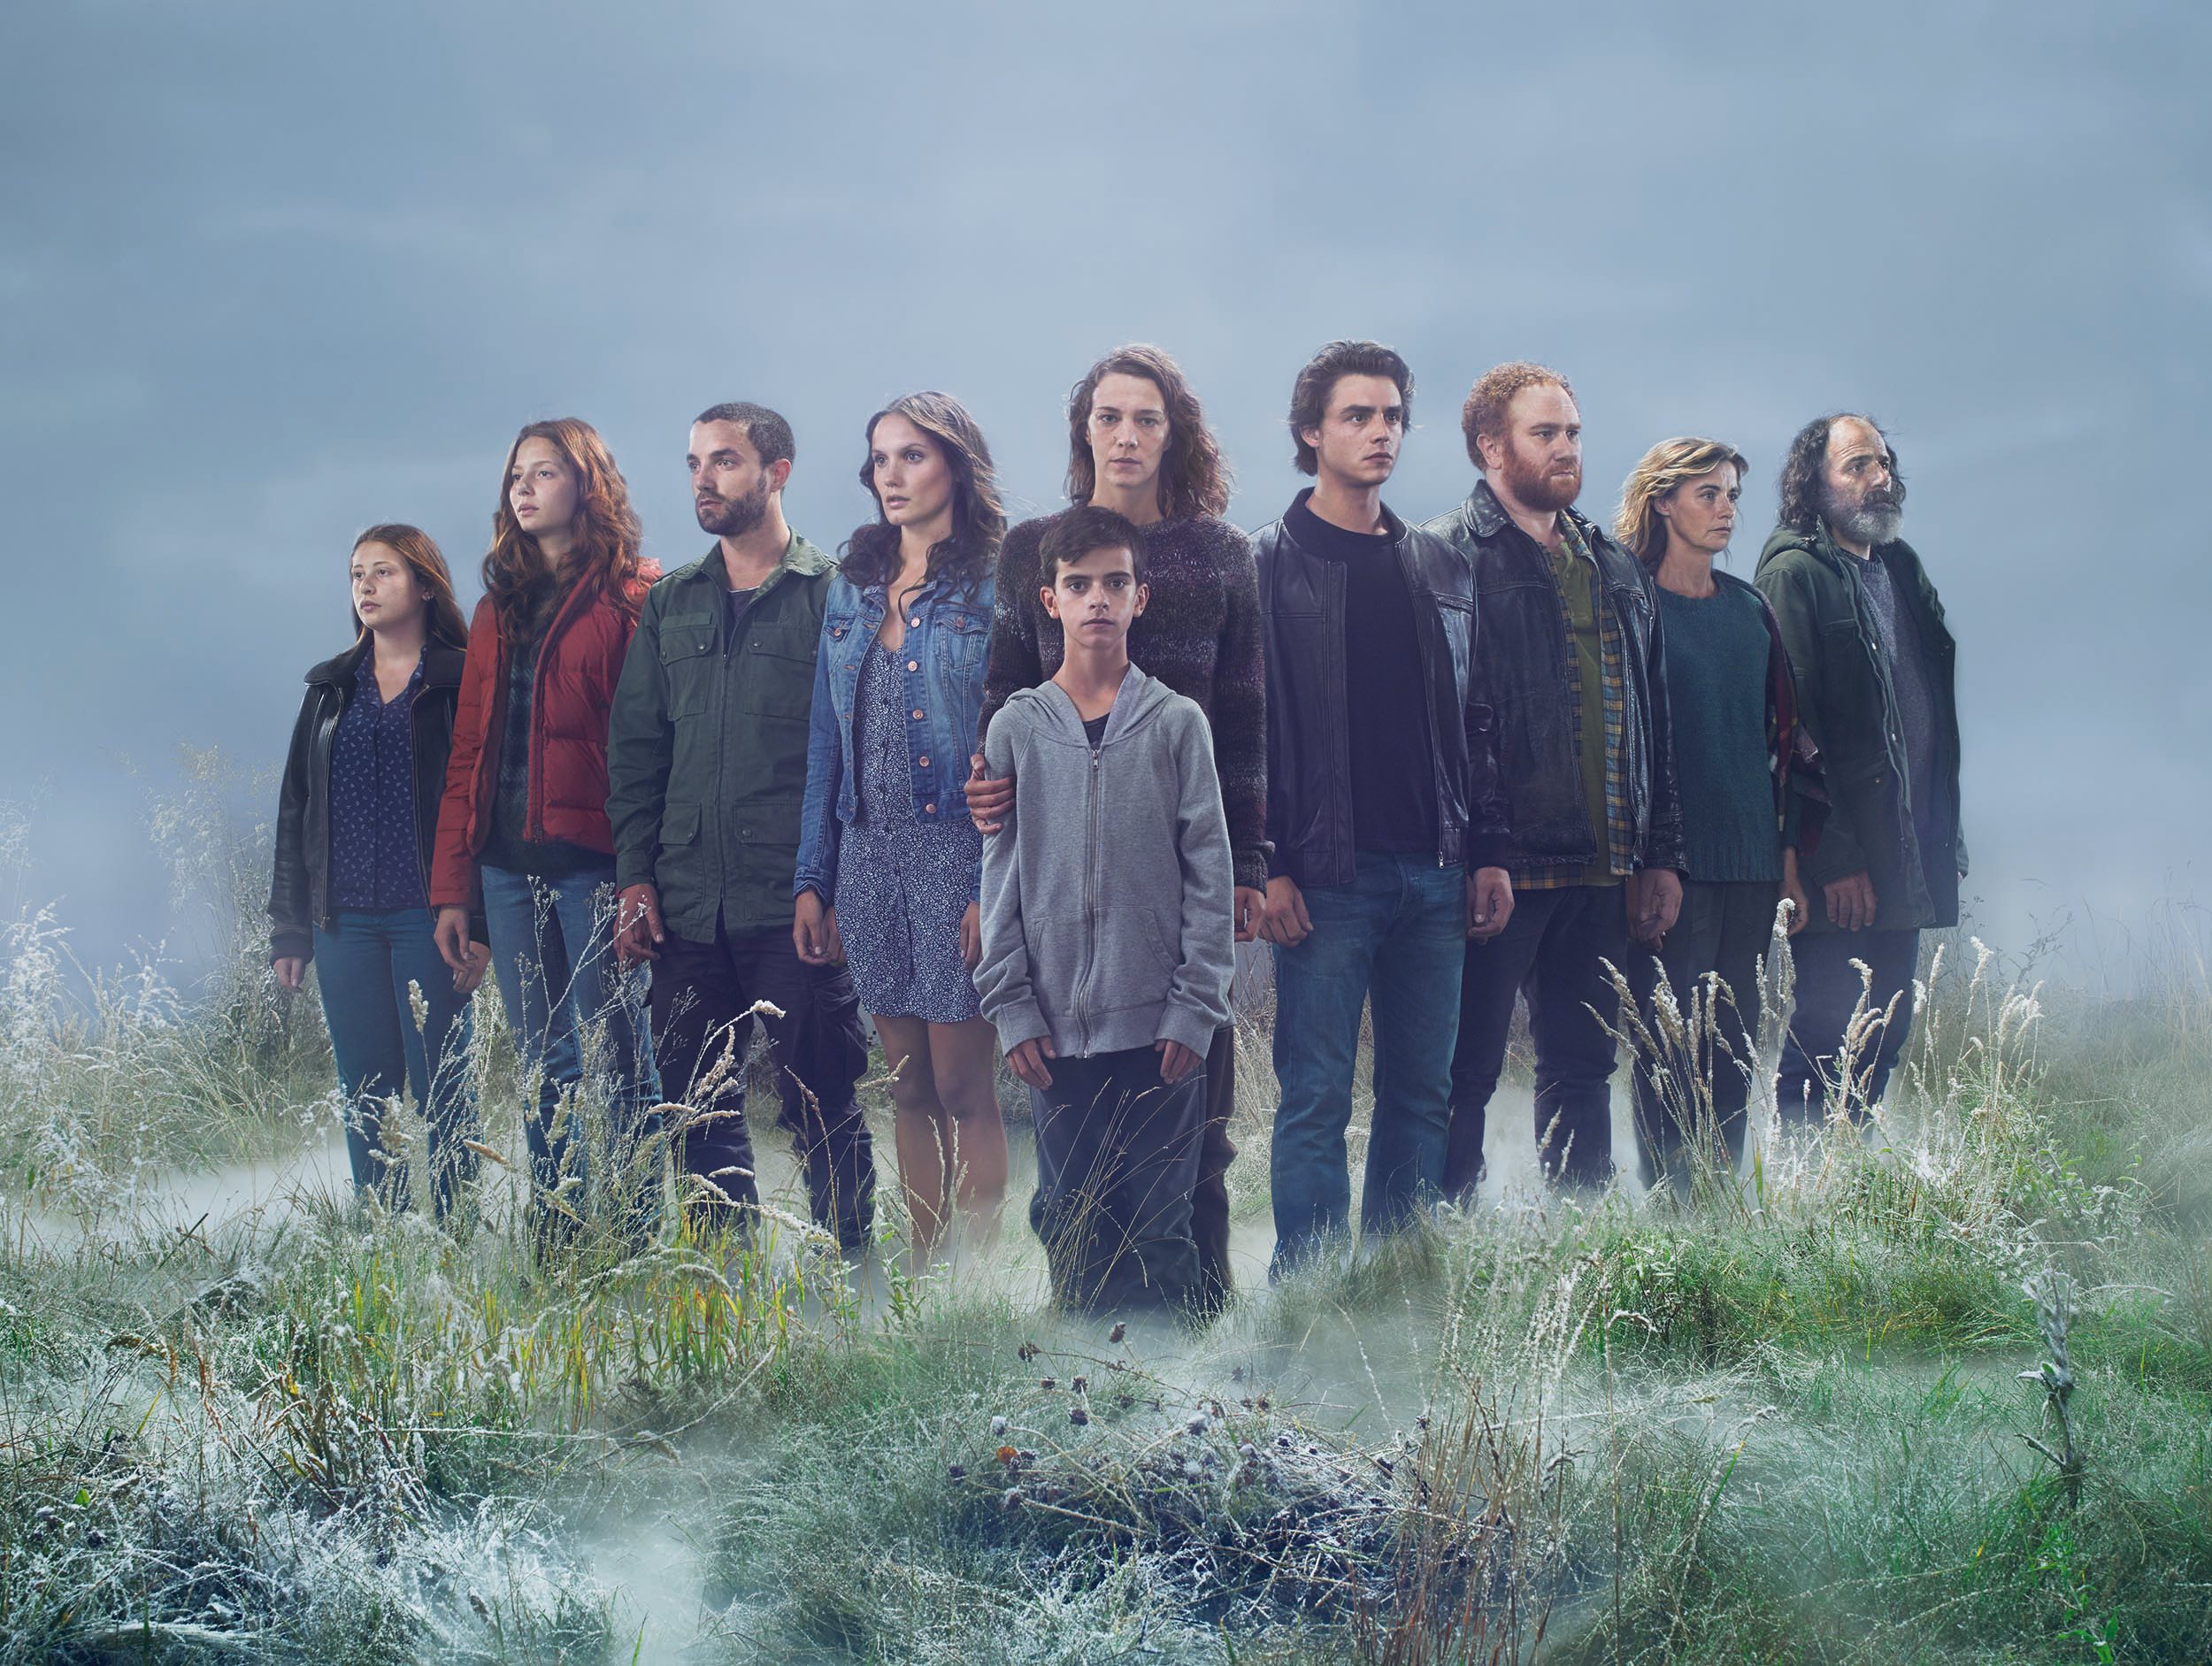 How did series 1 of The Returned end?